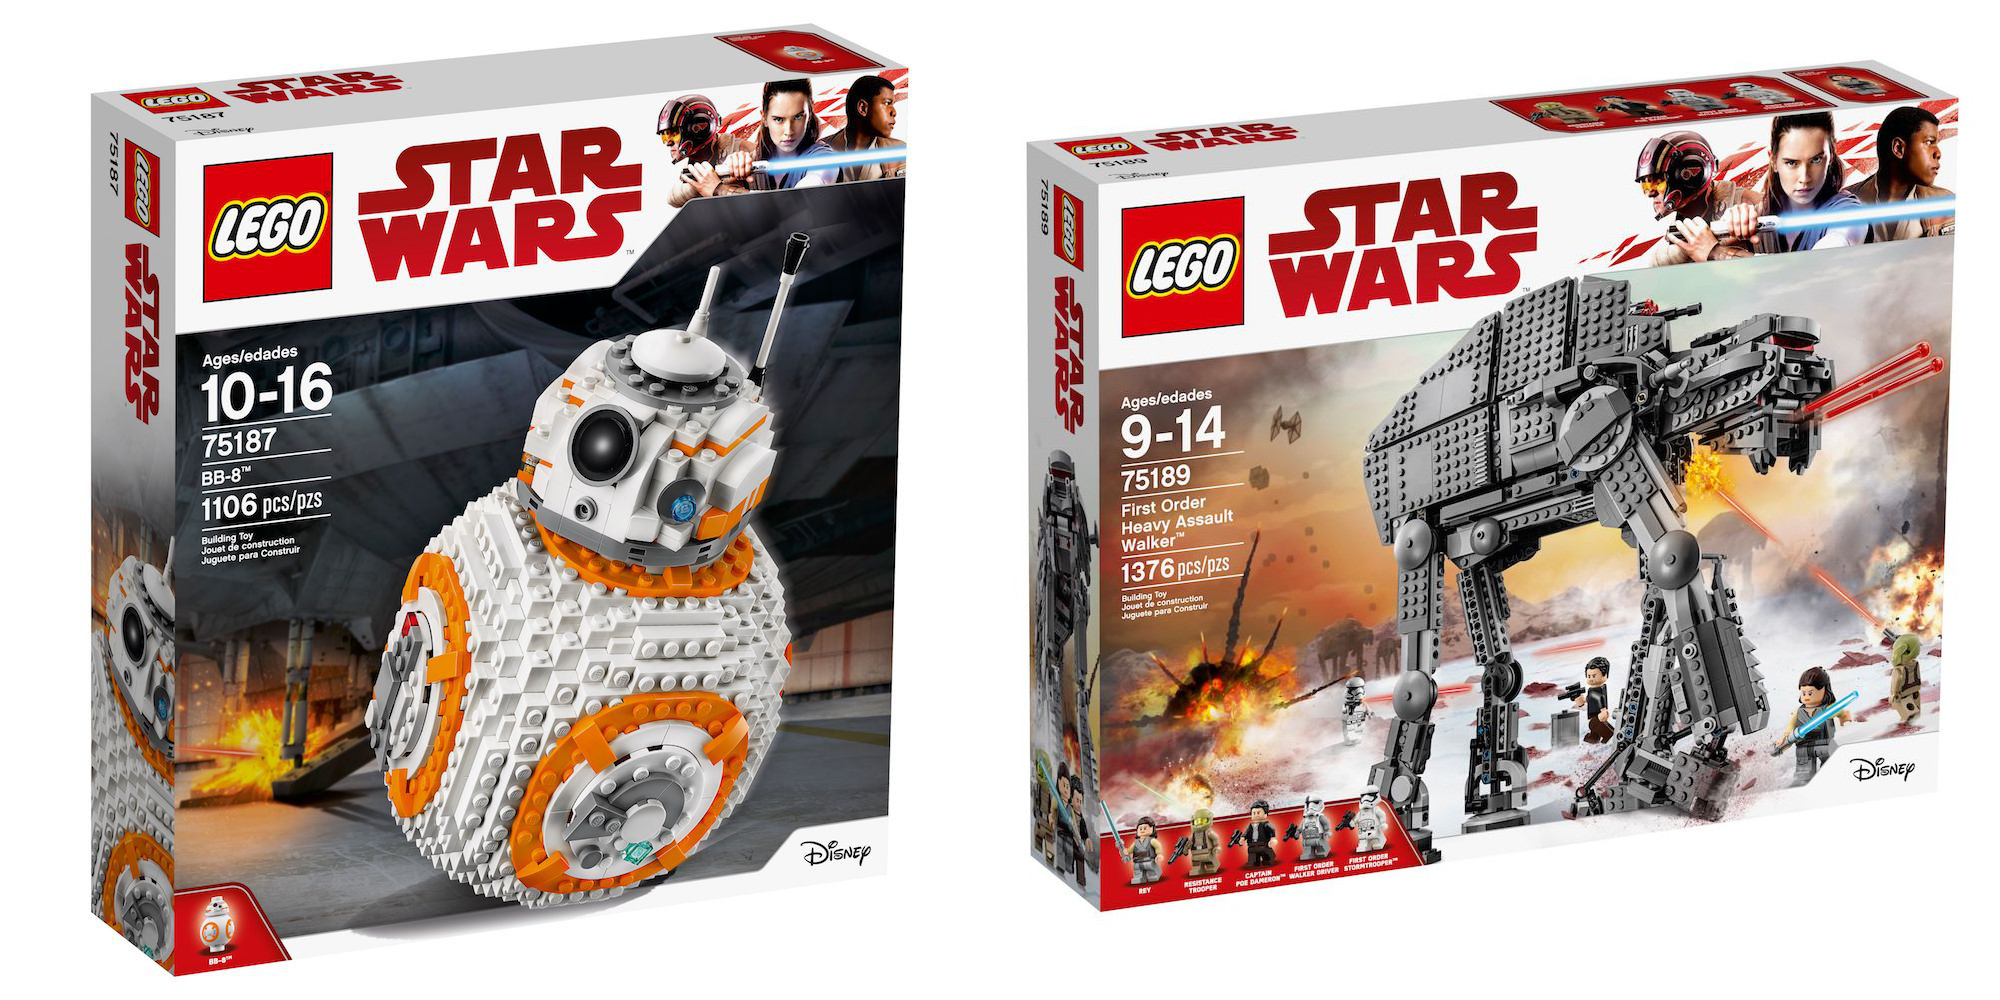 75187 LEGO STAR WARS BB-8 1106 Pieces Age 10-16 Years New Release 2017